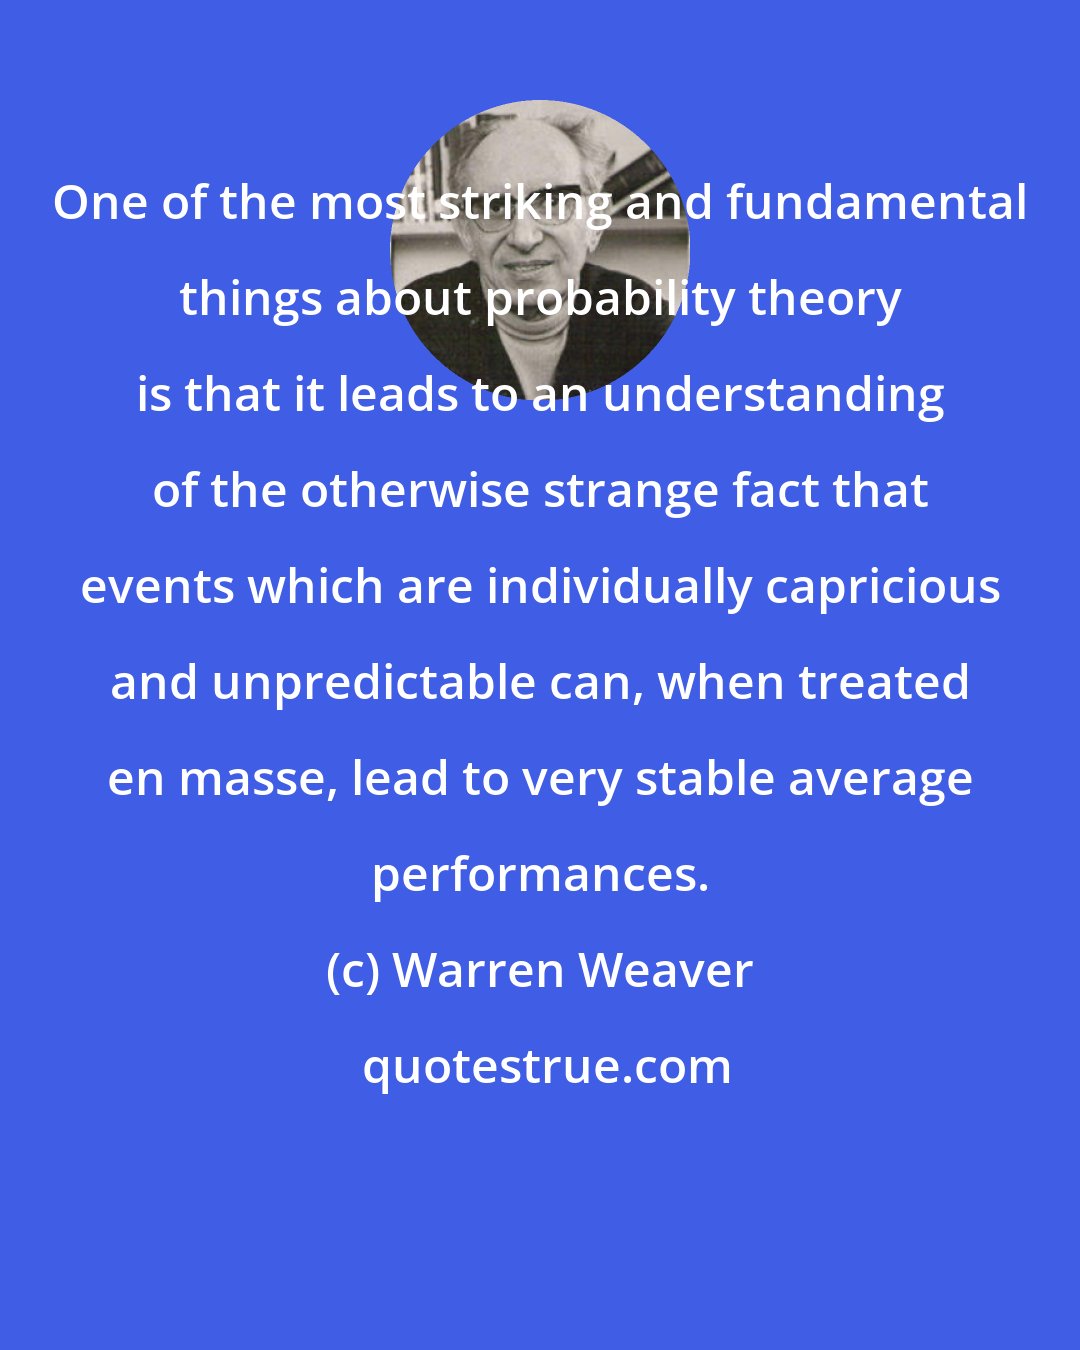 Warren Weaver: One of the most striking and fundamental things about probability theory is that it leads to an understanding of the otherwise strange fact that events which are individually capricious and unpredictable can, when treated en masse, lead to very stable average performances.